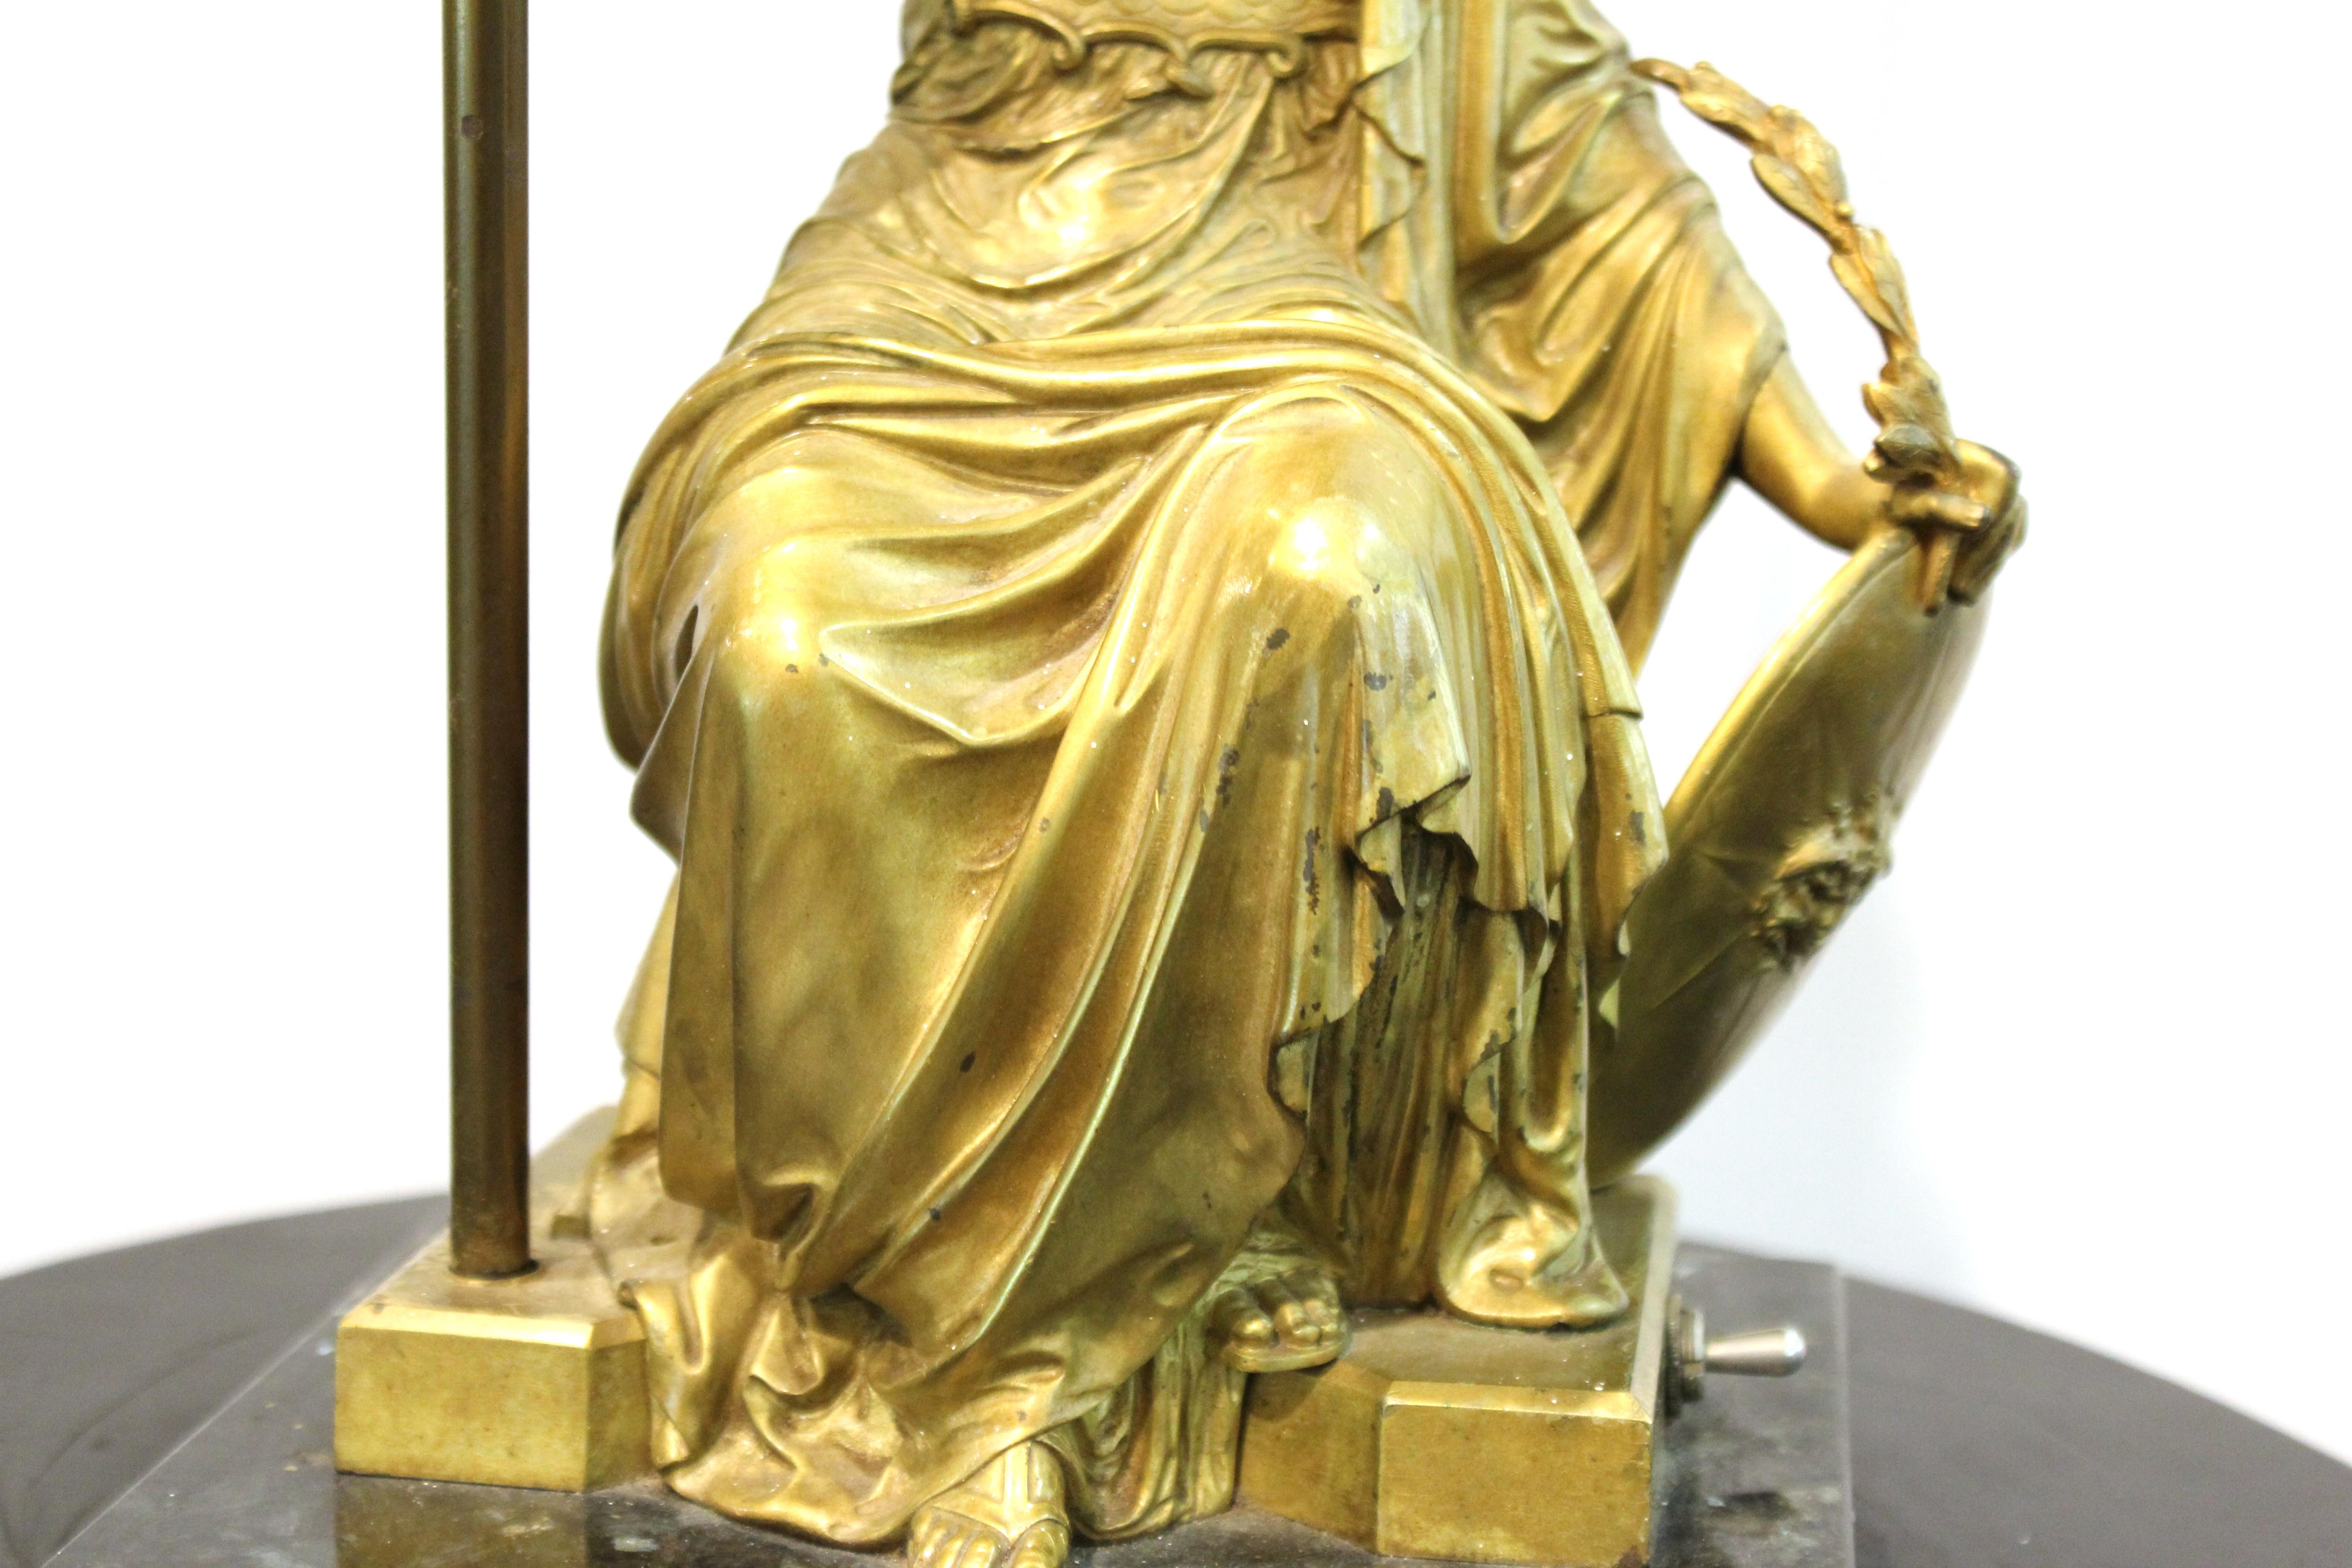 French Neoclassical Revival Style Table Lamp With Seated Bronze Athena Sculpture 1